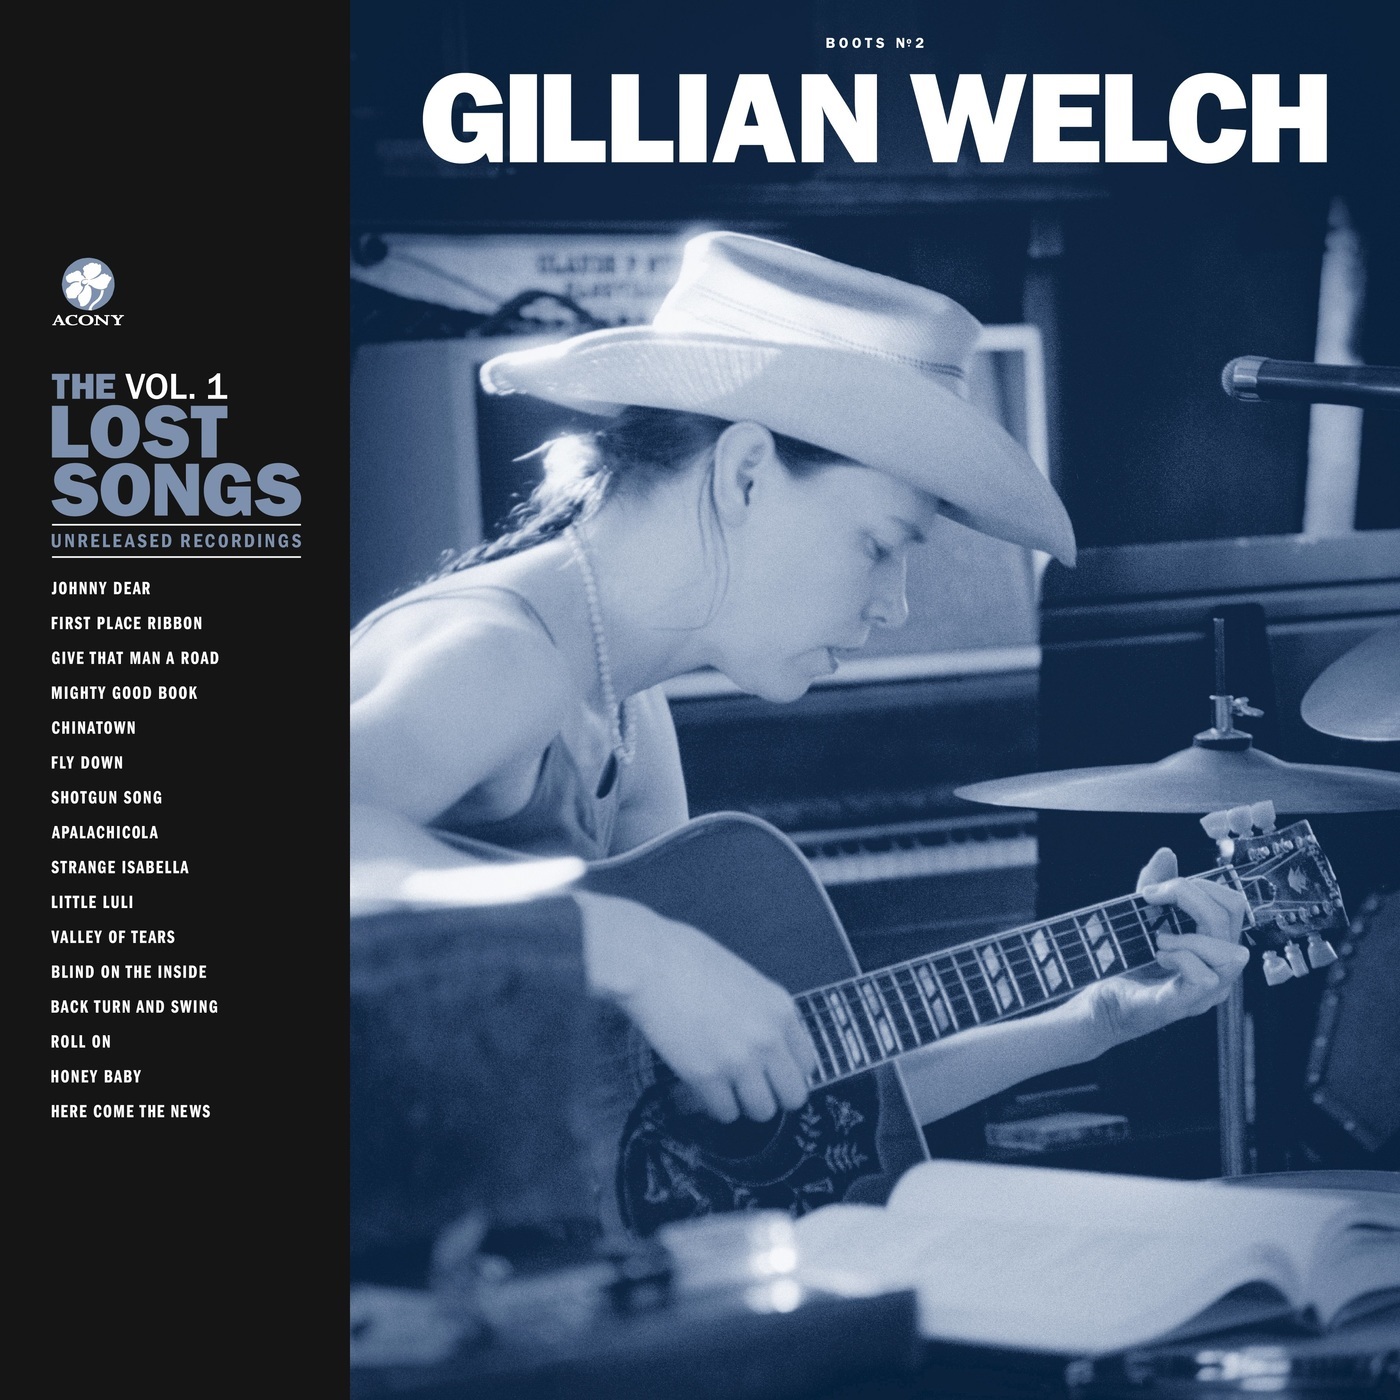 Gillian Welch - Boots No. 2: The Lost Songs Vol. 1 (2020) [FLAC 24bit/44,1kHz]